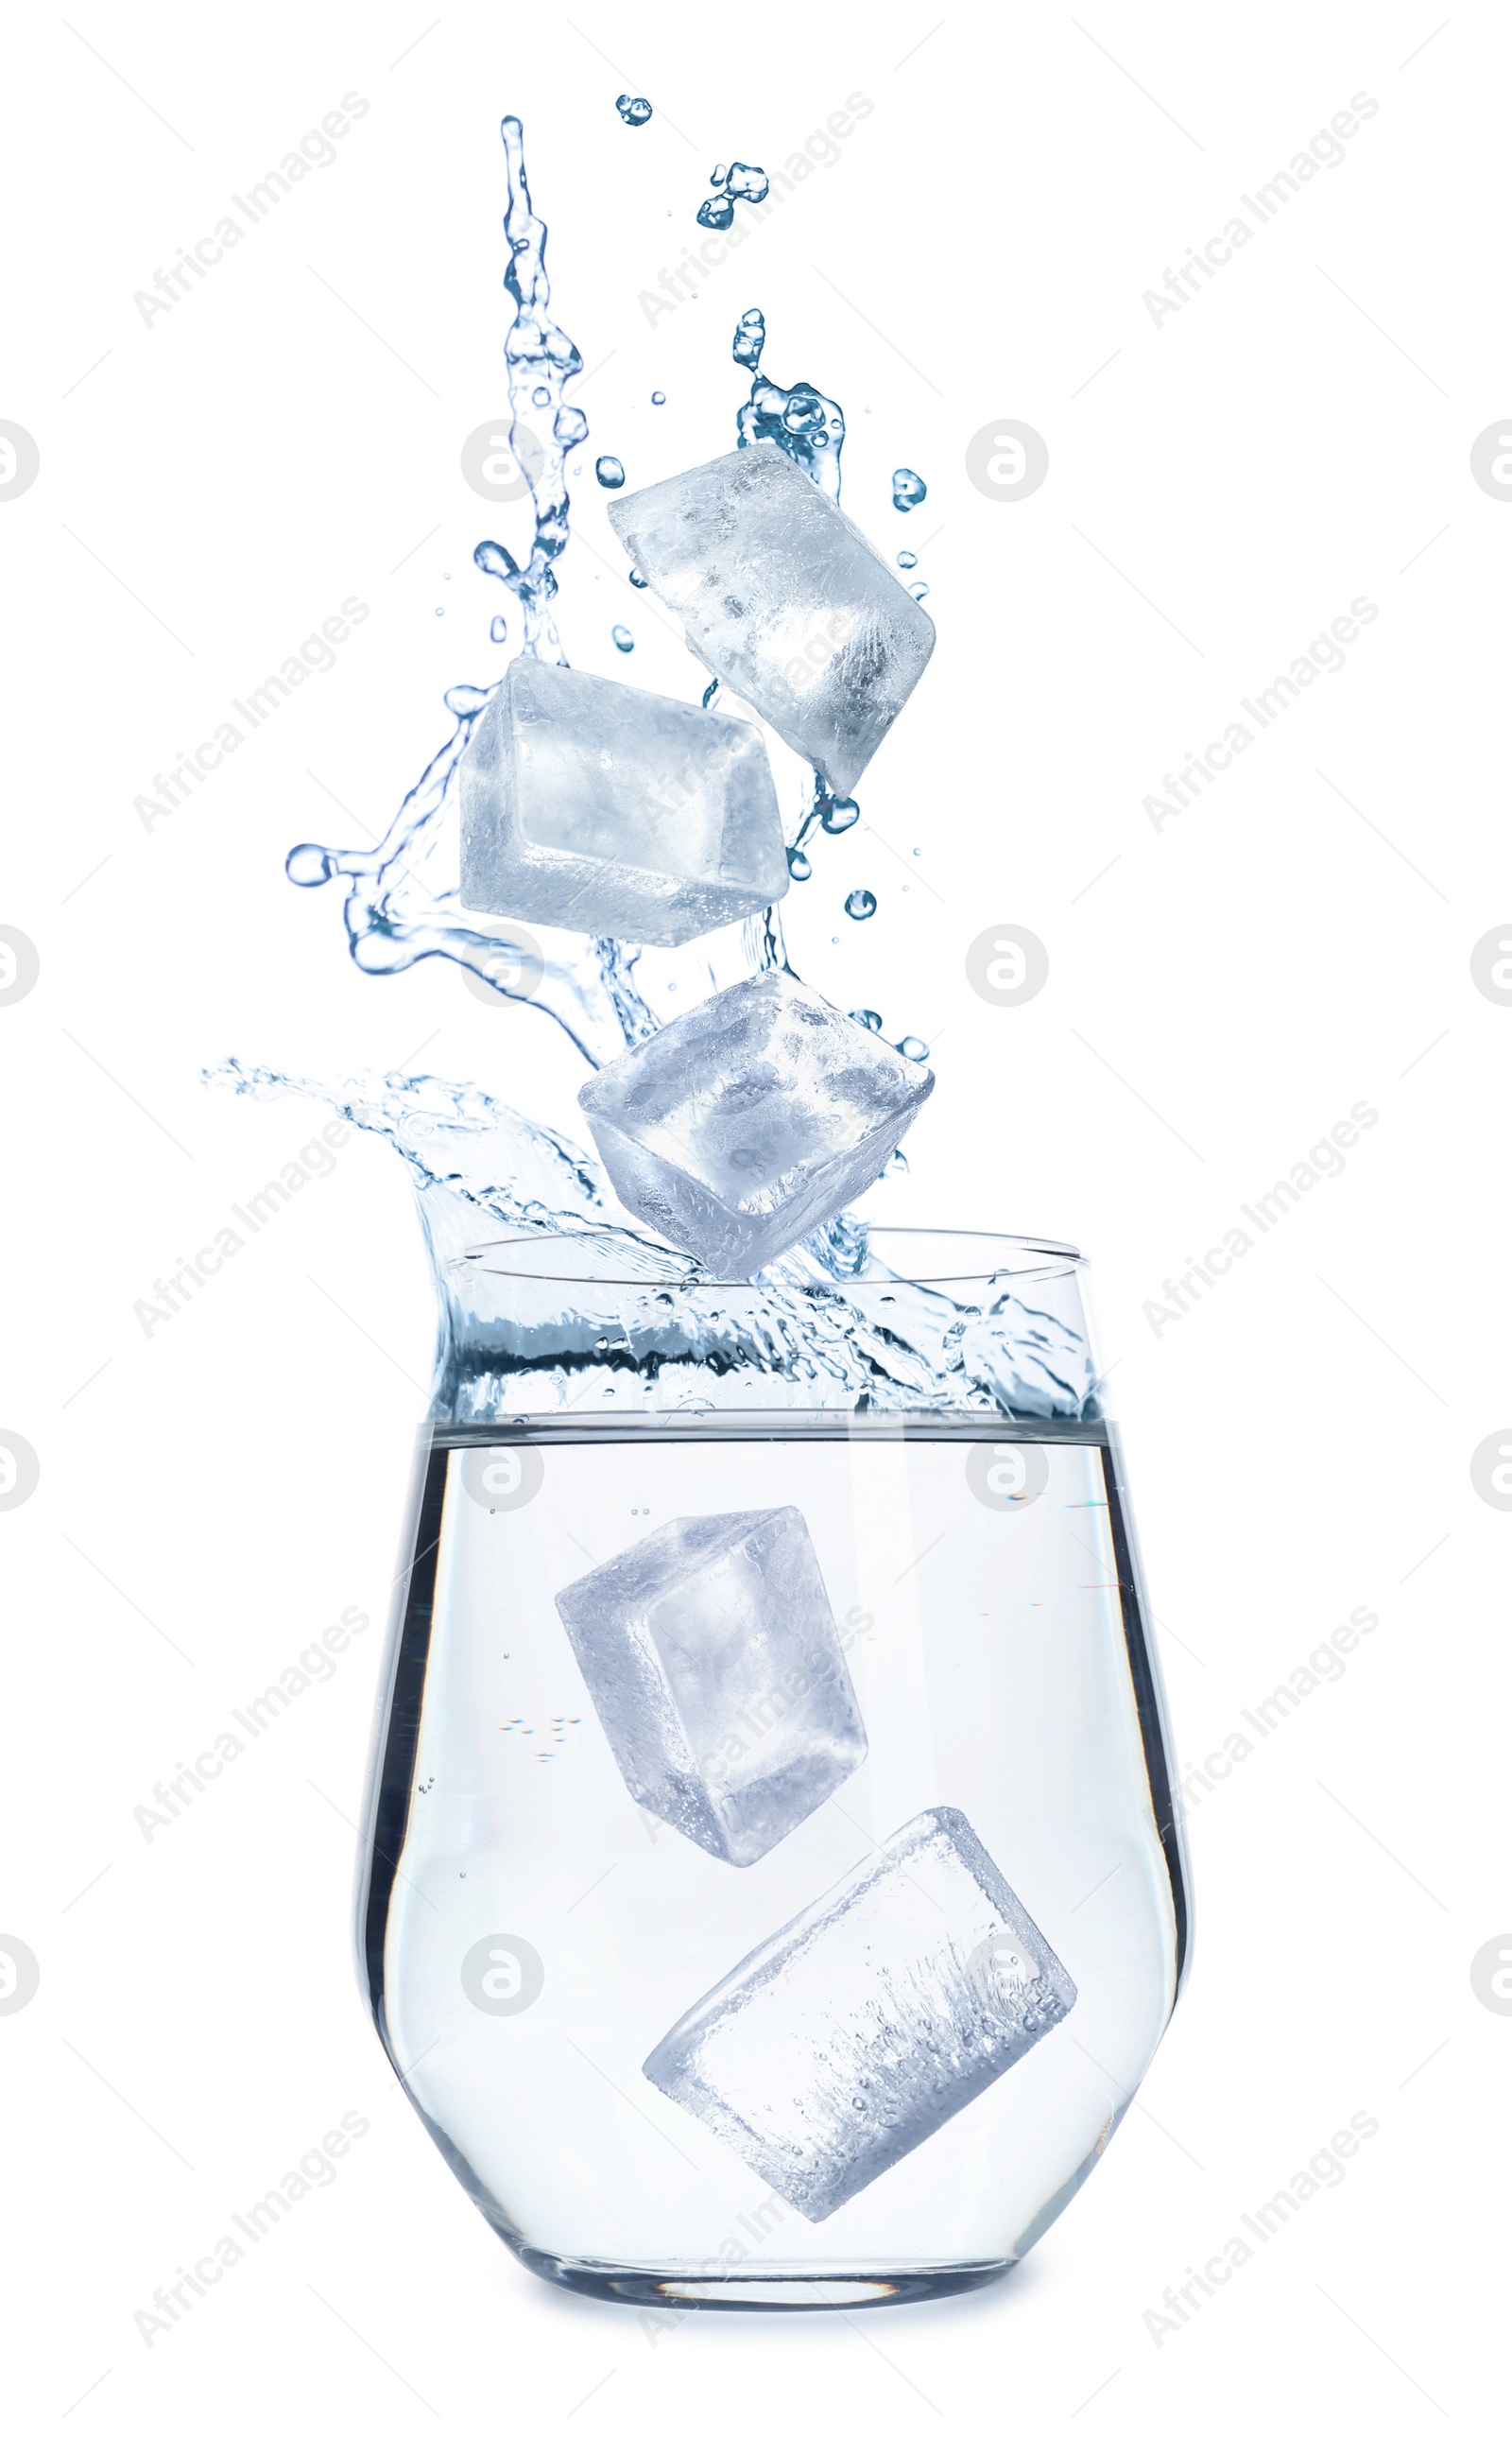 Image of Crystal ice cubes falling into water on white background. Refreshing drink